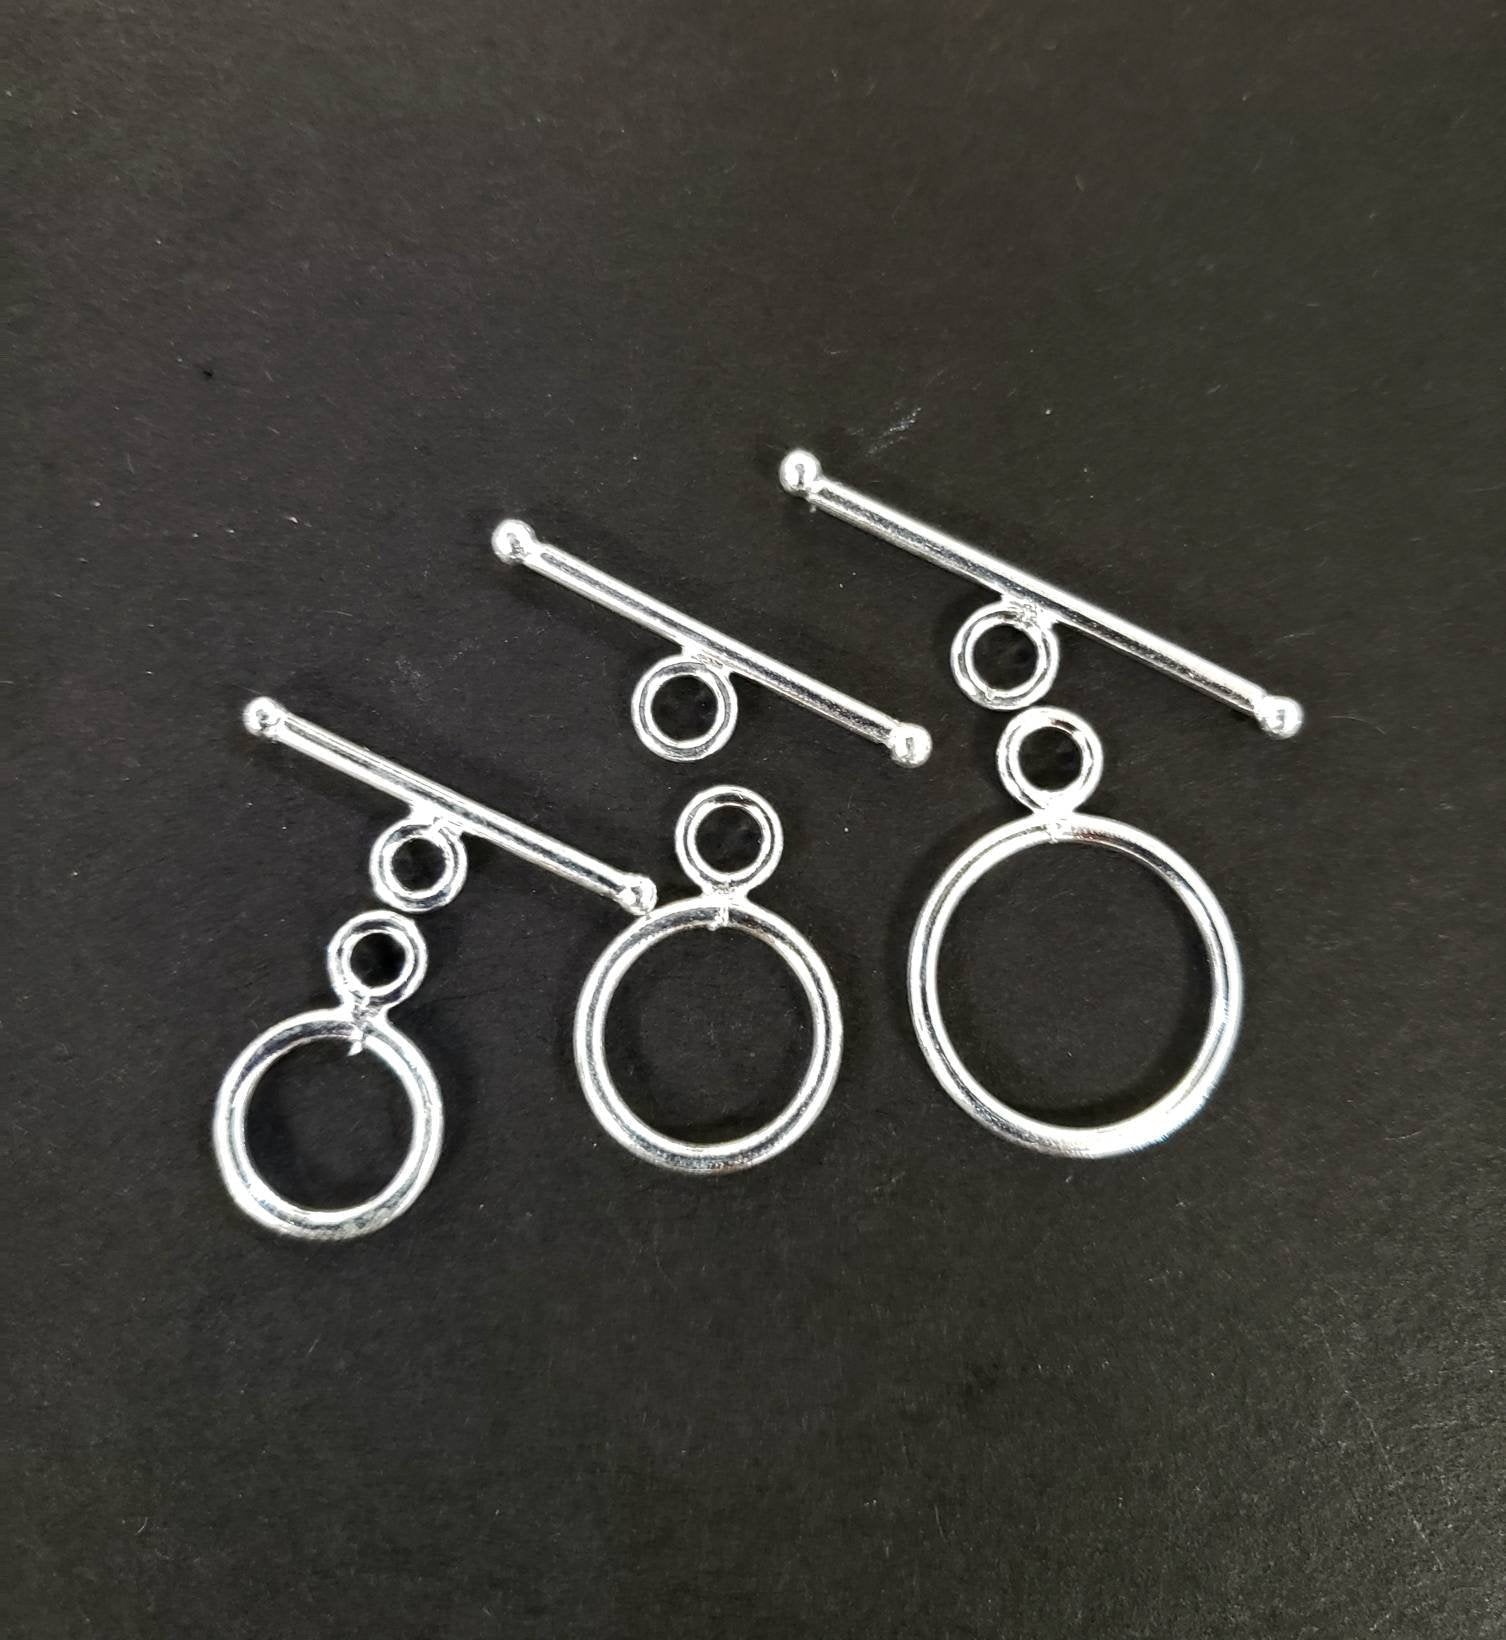 925 sterling silver 10mm, 12mm,15mm round toggle clasp, smooth finish jewelry making toggle clasp.